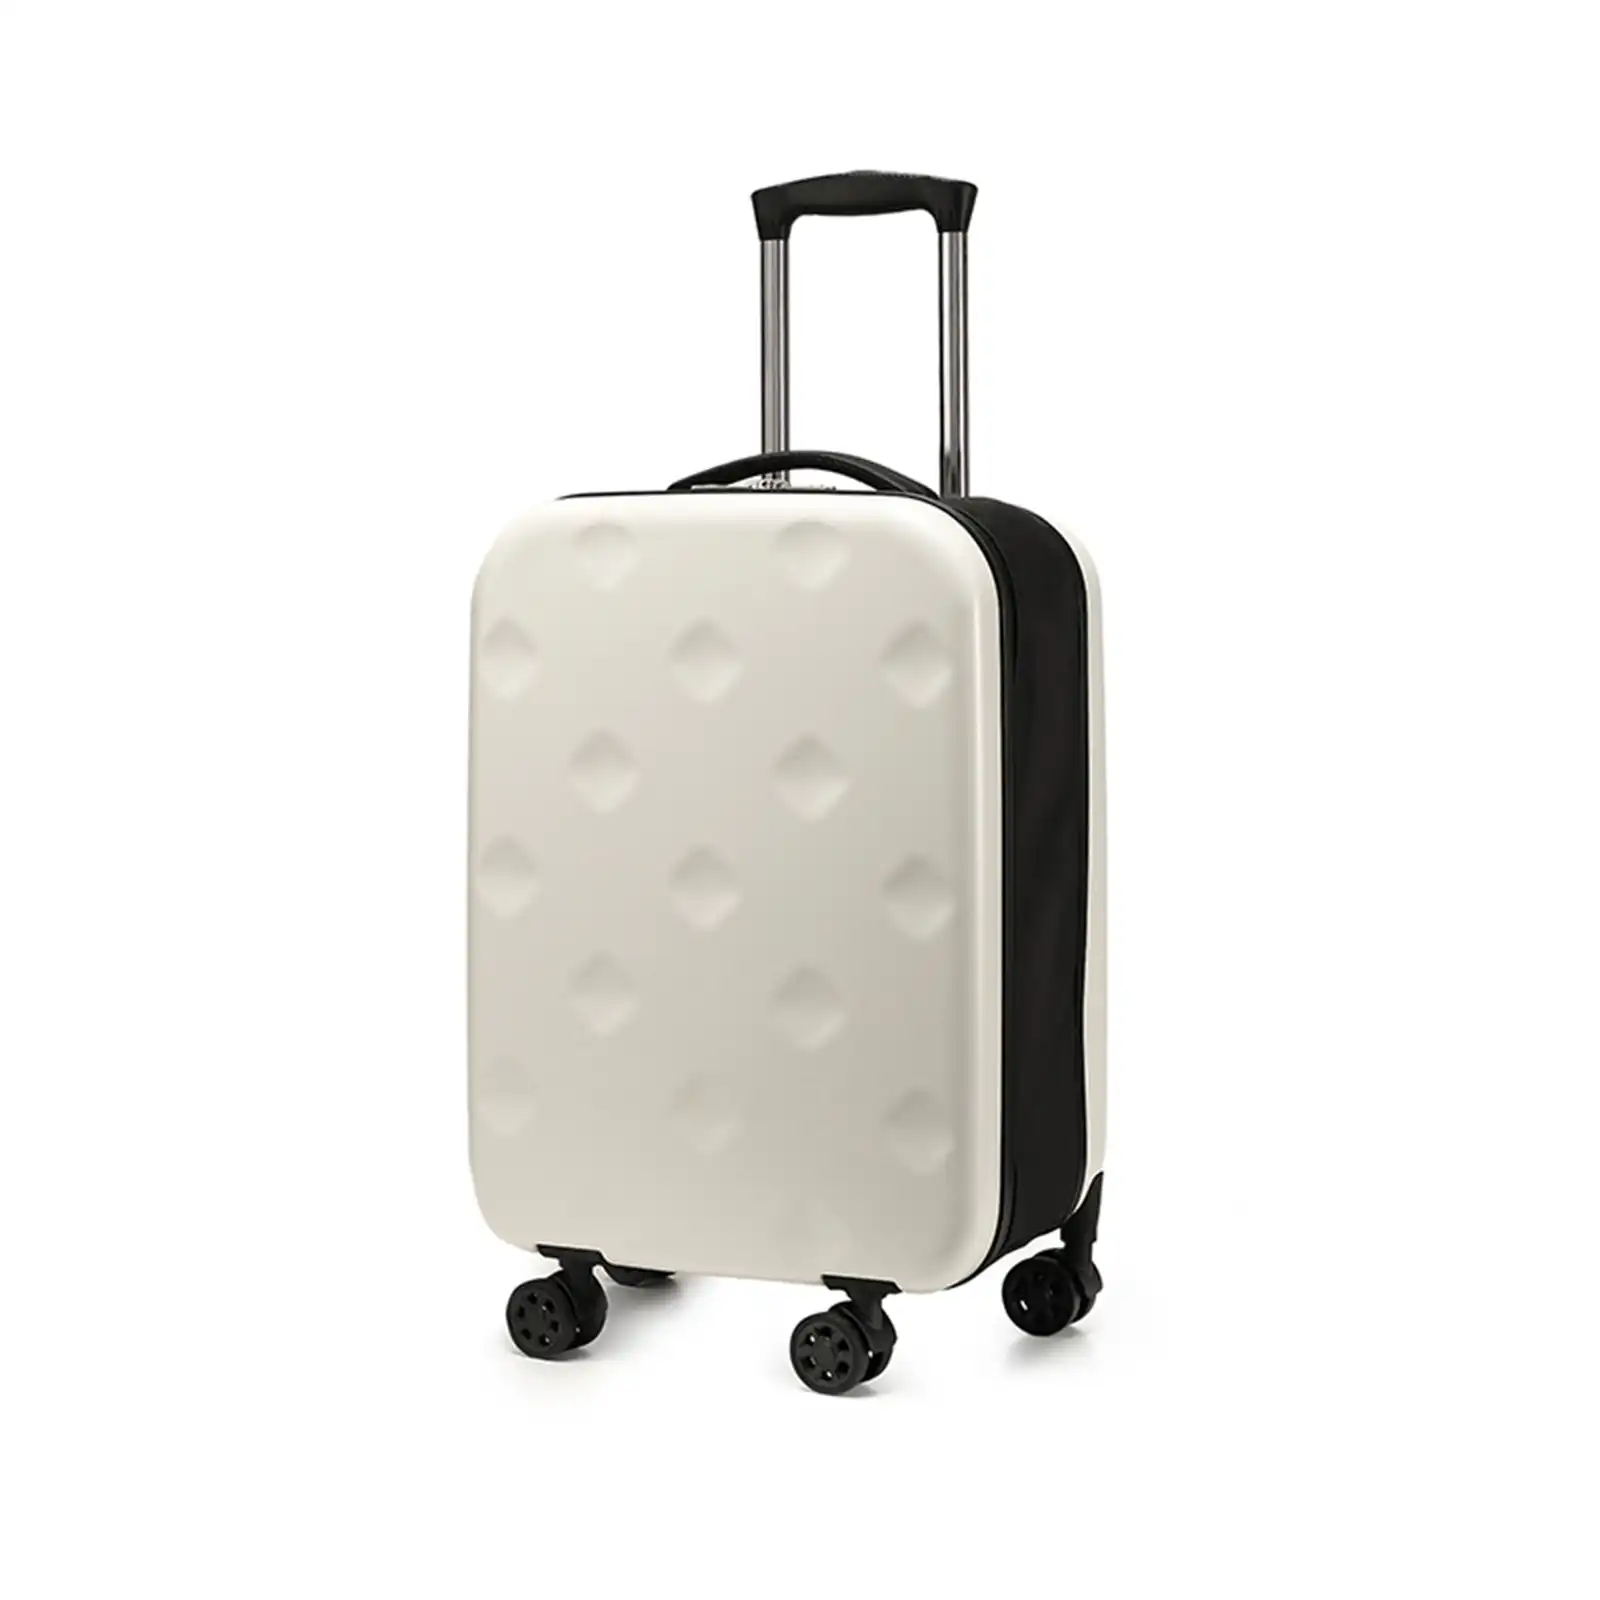 Viviendo 24'' Collapsible Suitcase, Foldable Space Saving Luggage - White